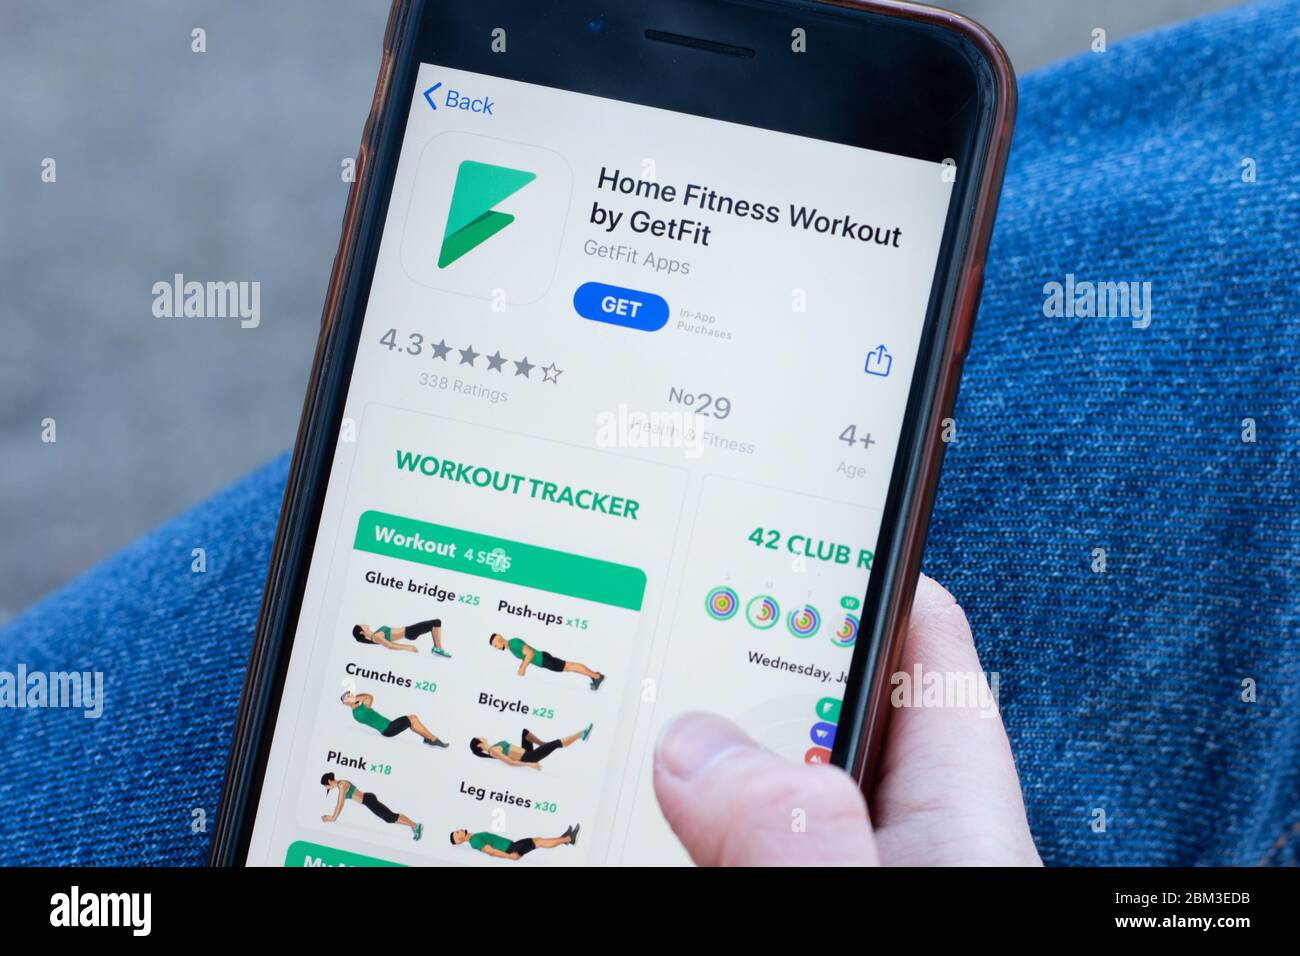 New York, USA - 1 May 2020: Home Fitness Workout by GetFit app logo close-up on phone screen, Illustrative Editorial Stock Photo